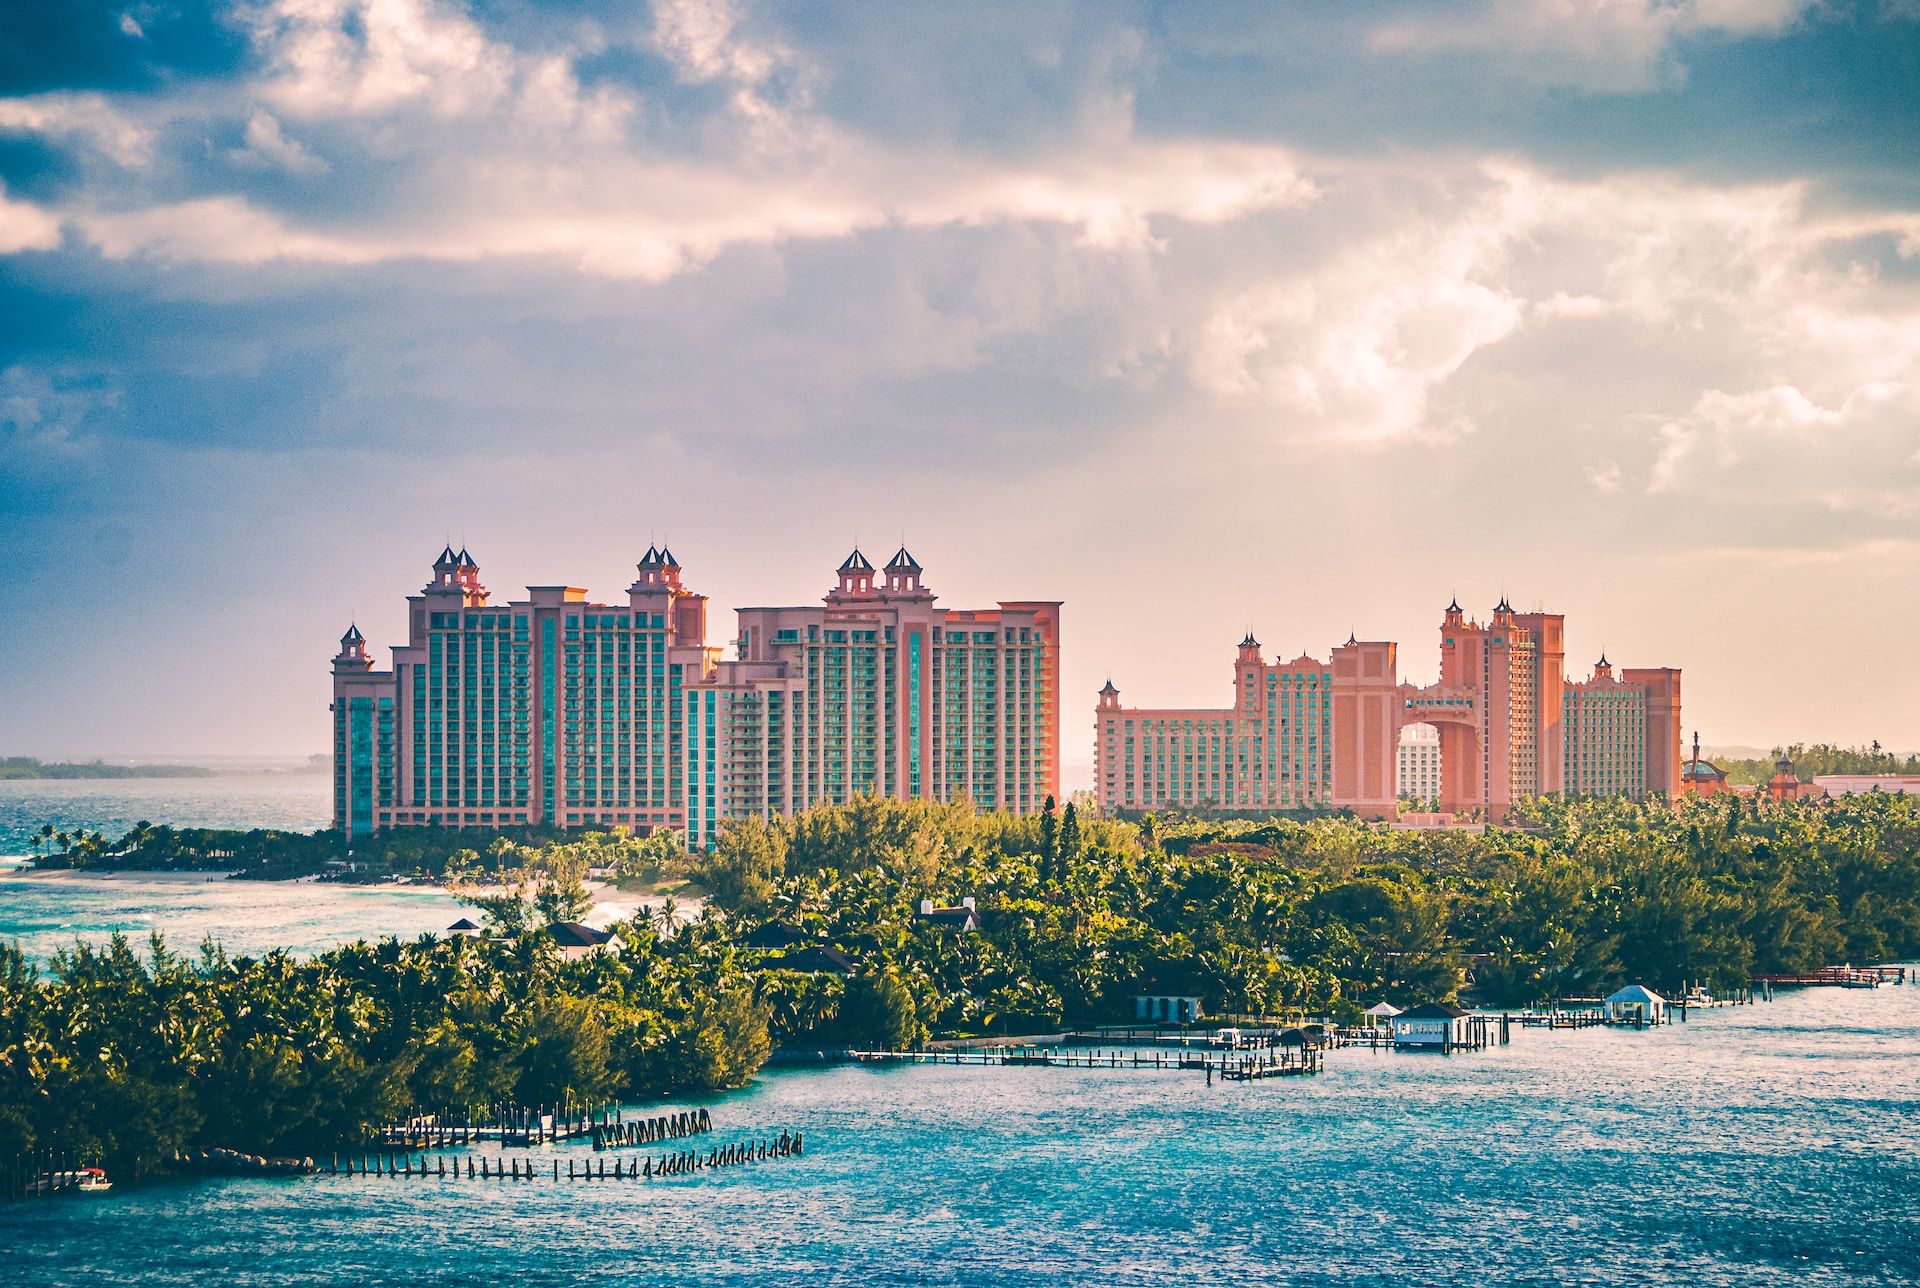 The glorious and huge Atlantis resort in the Bahamas.